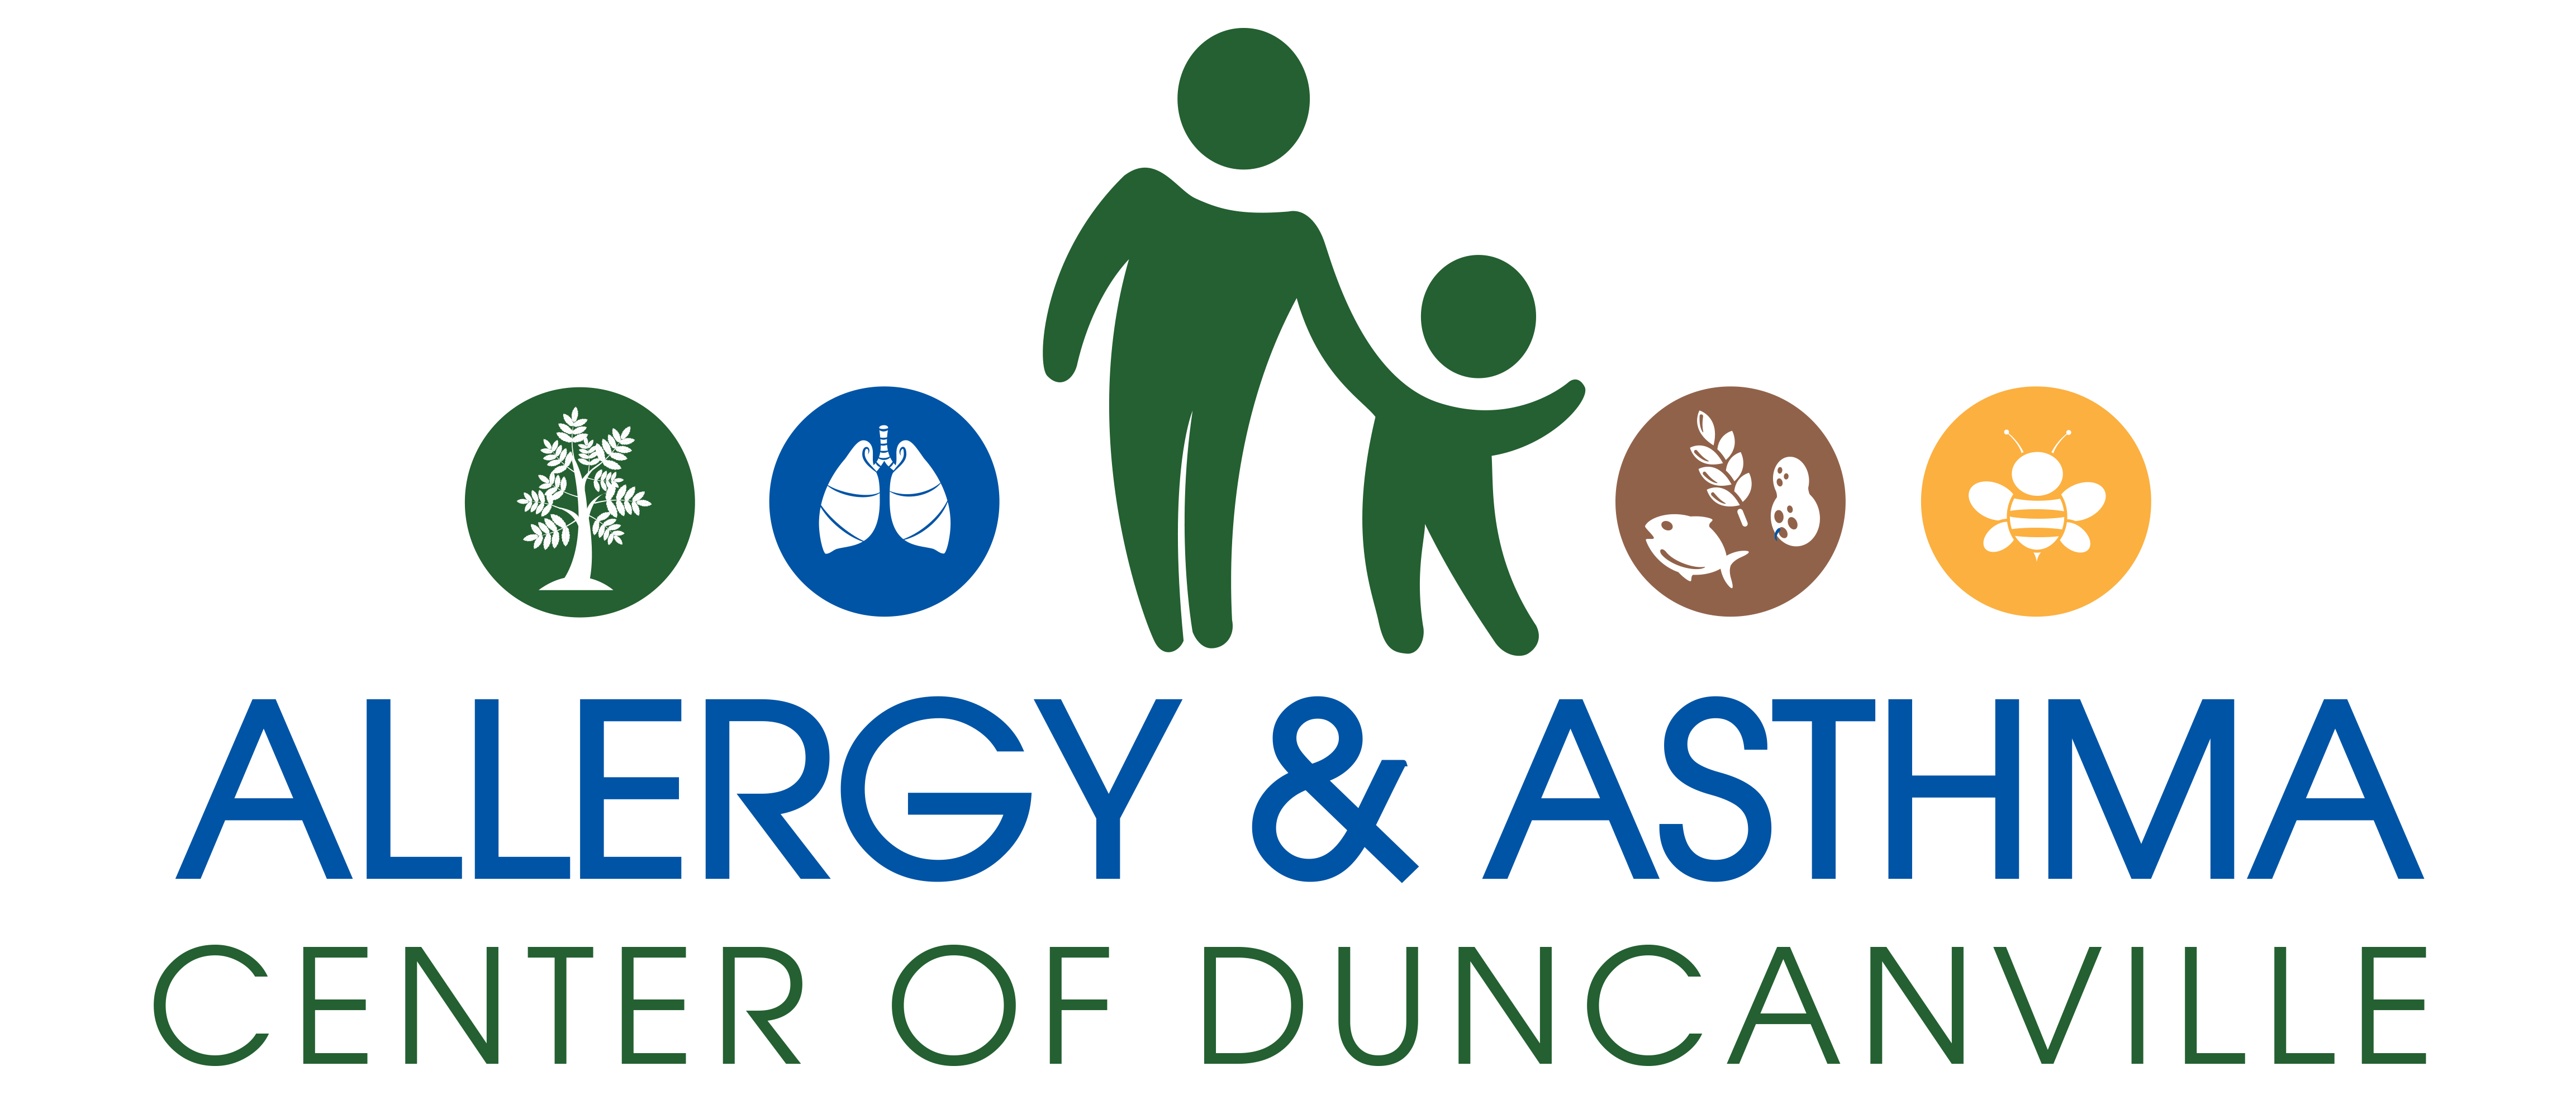 Asthma Logo - Home - Allergy and Asthma Center of Duncanville